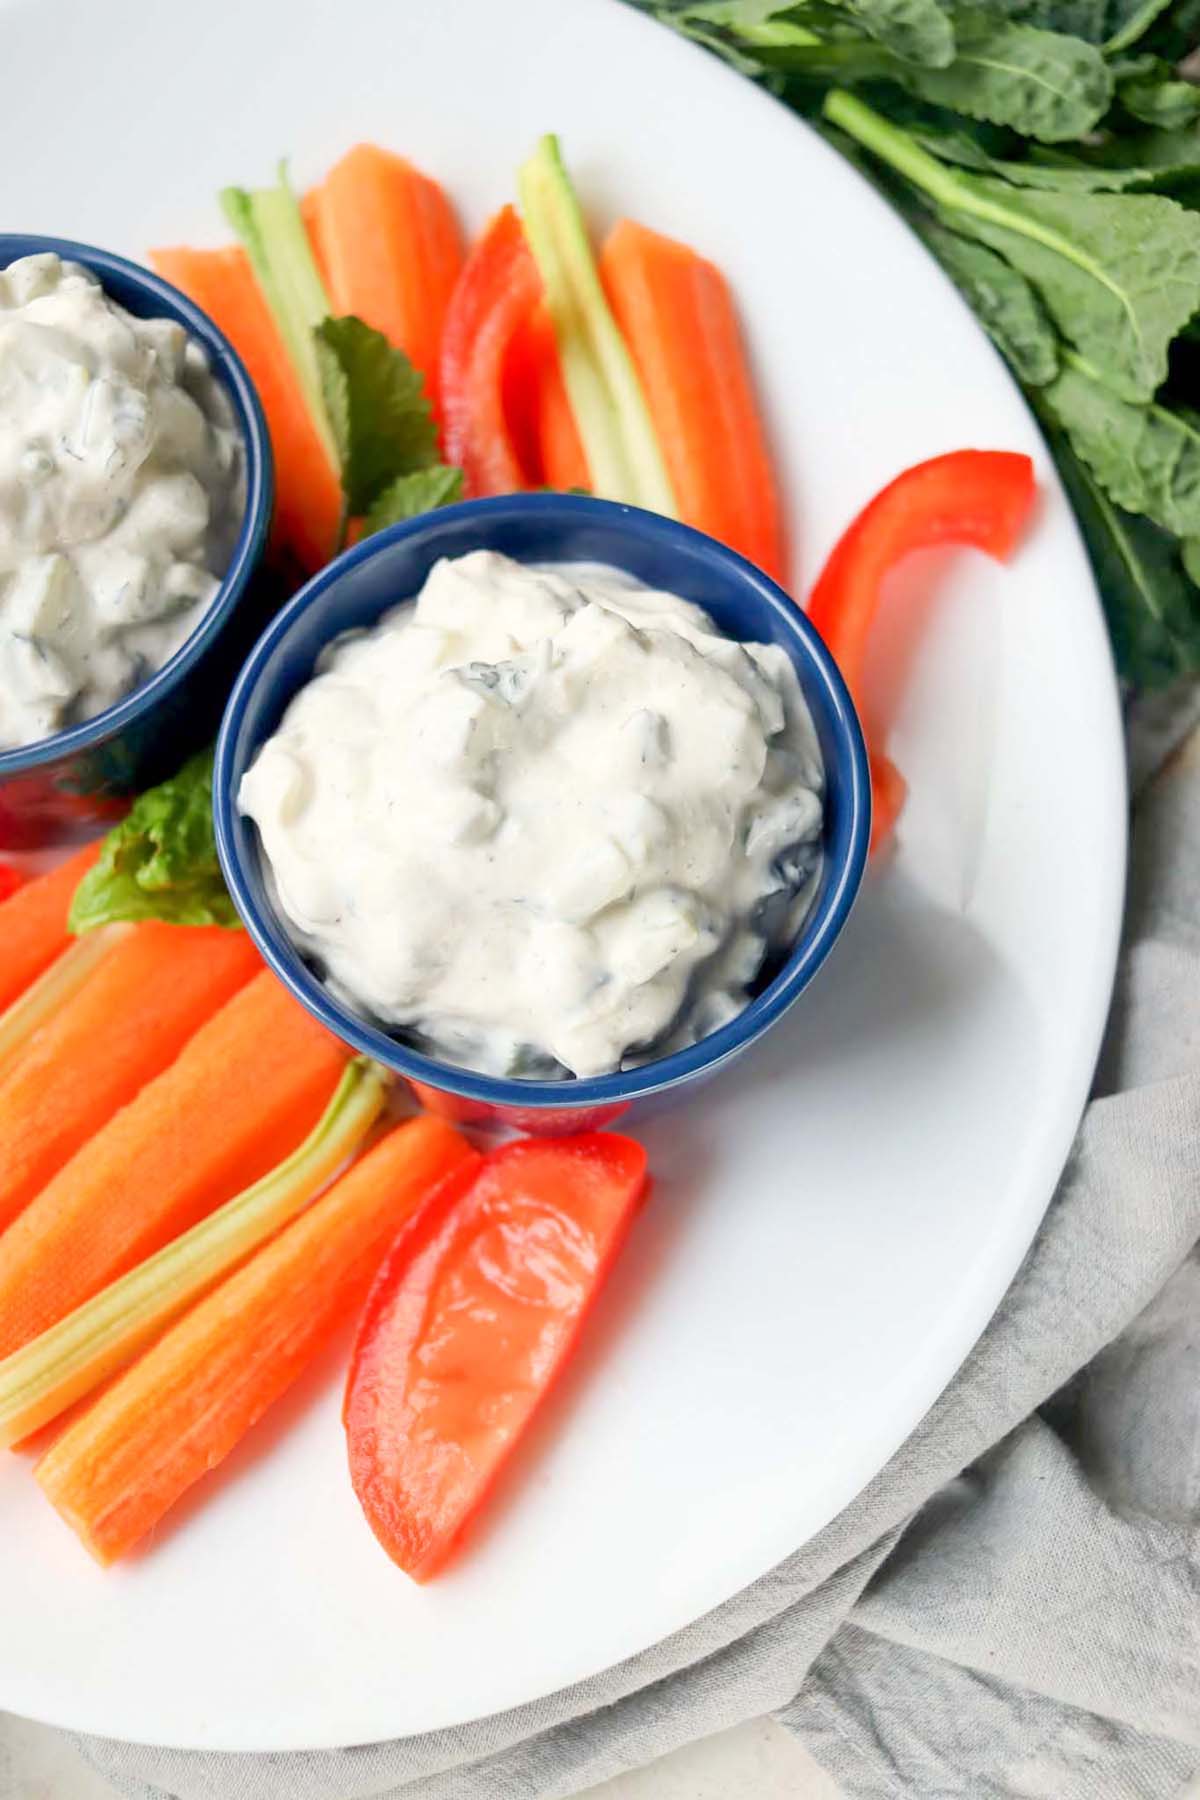 cucumber dill dip on a plate with carrots sticks.